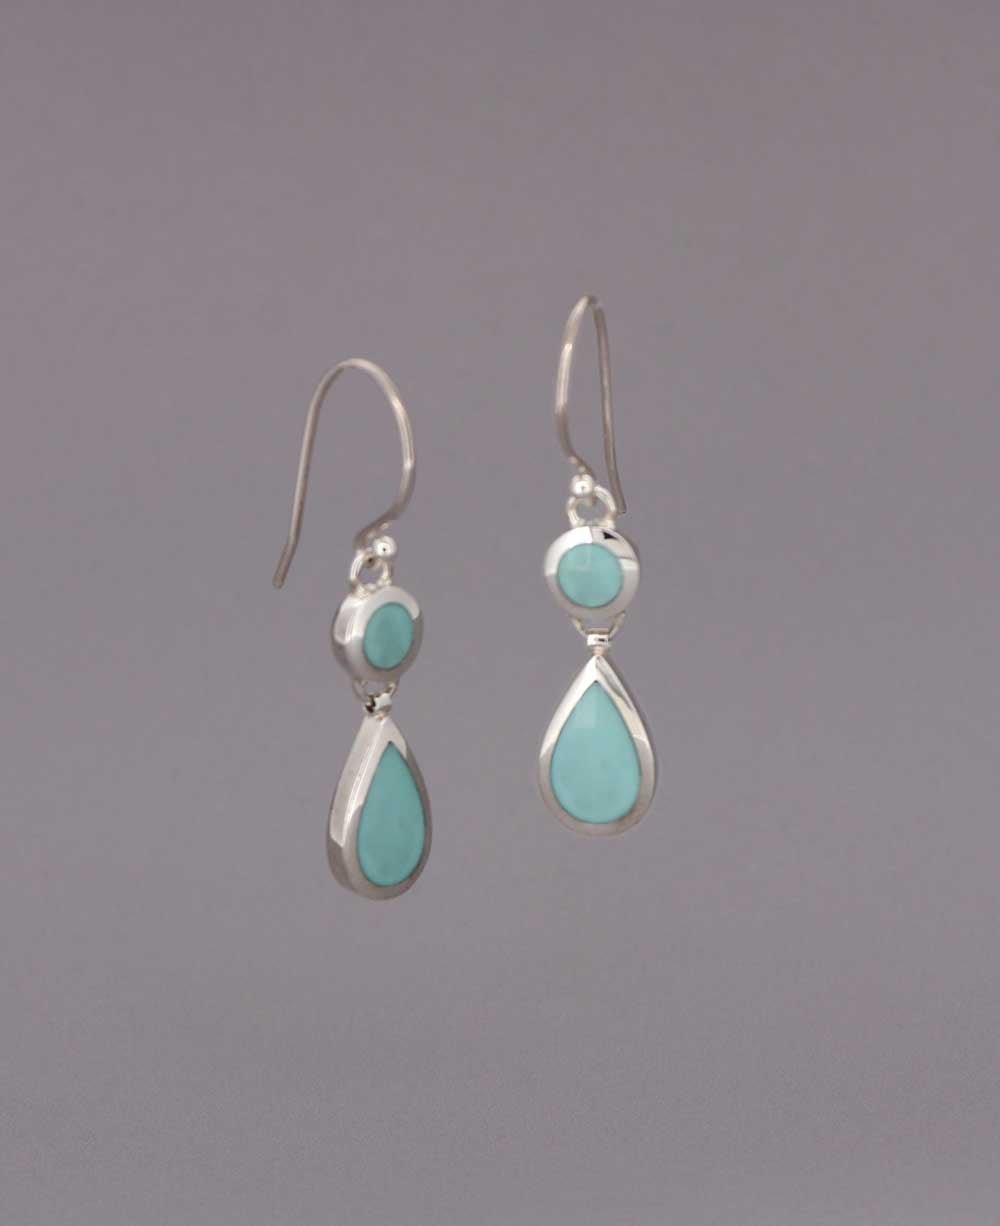 Sterling Silver Turquoise Dangle Earrings with Round and Teardrop Inlays - Earrings